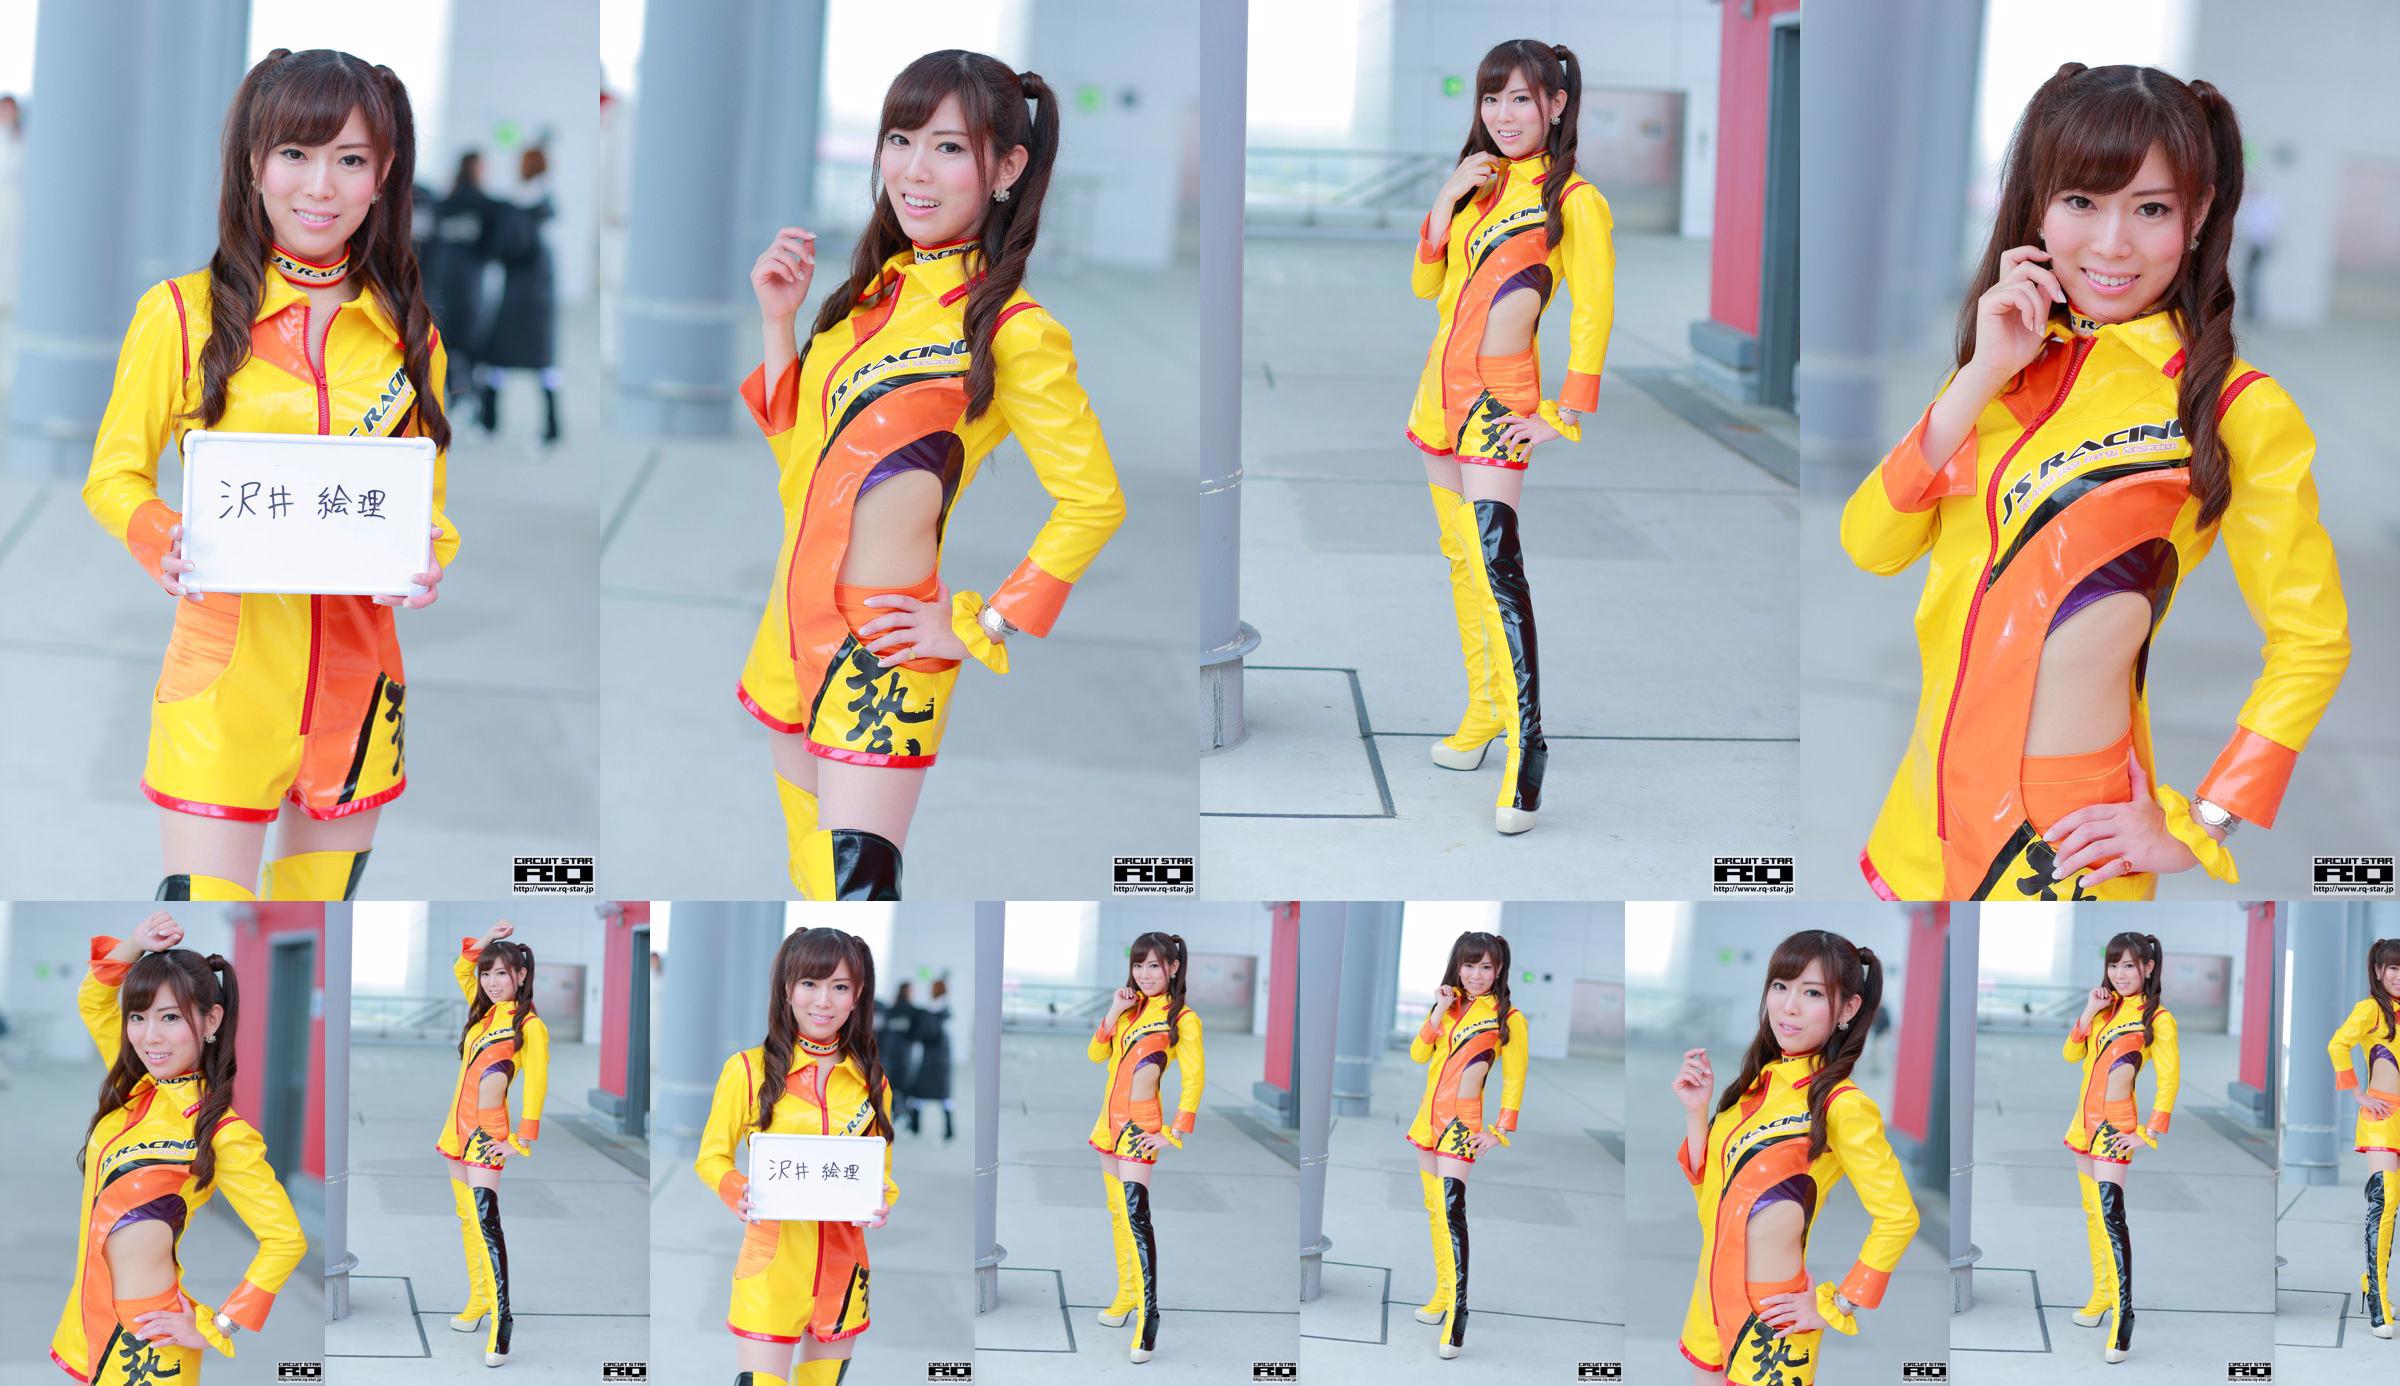 [RQ-STAR] NO 00742 Chihiro Ando Race Queen Race Queen No.27f492 Page 7